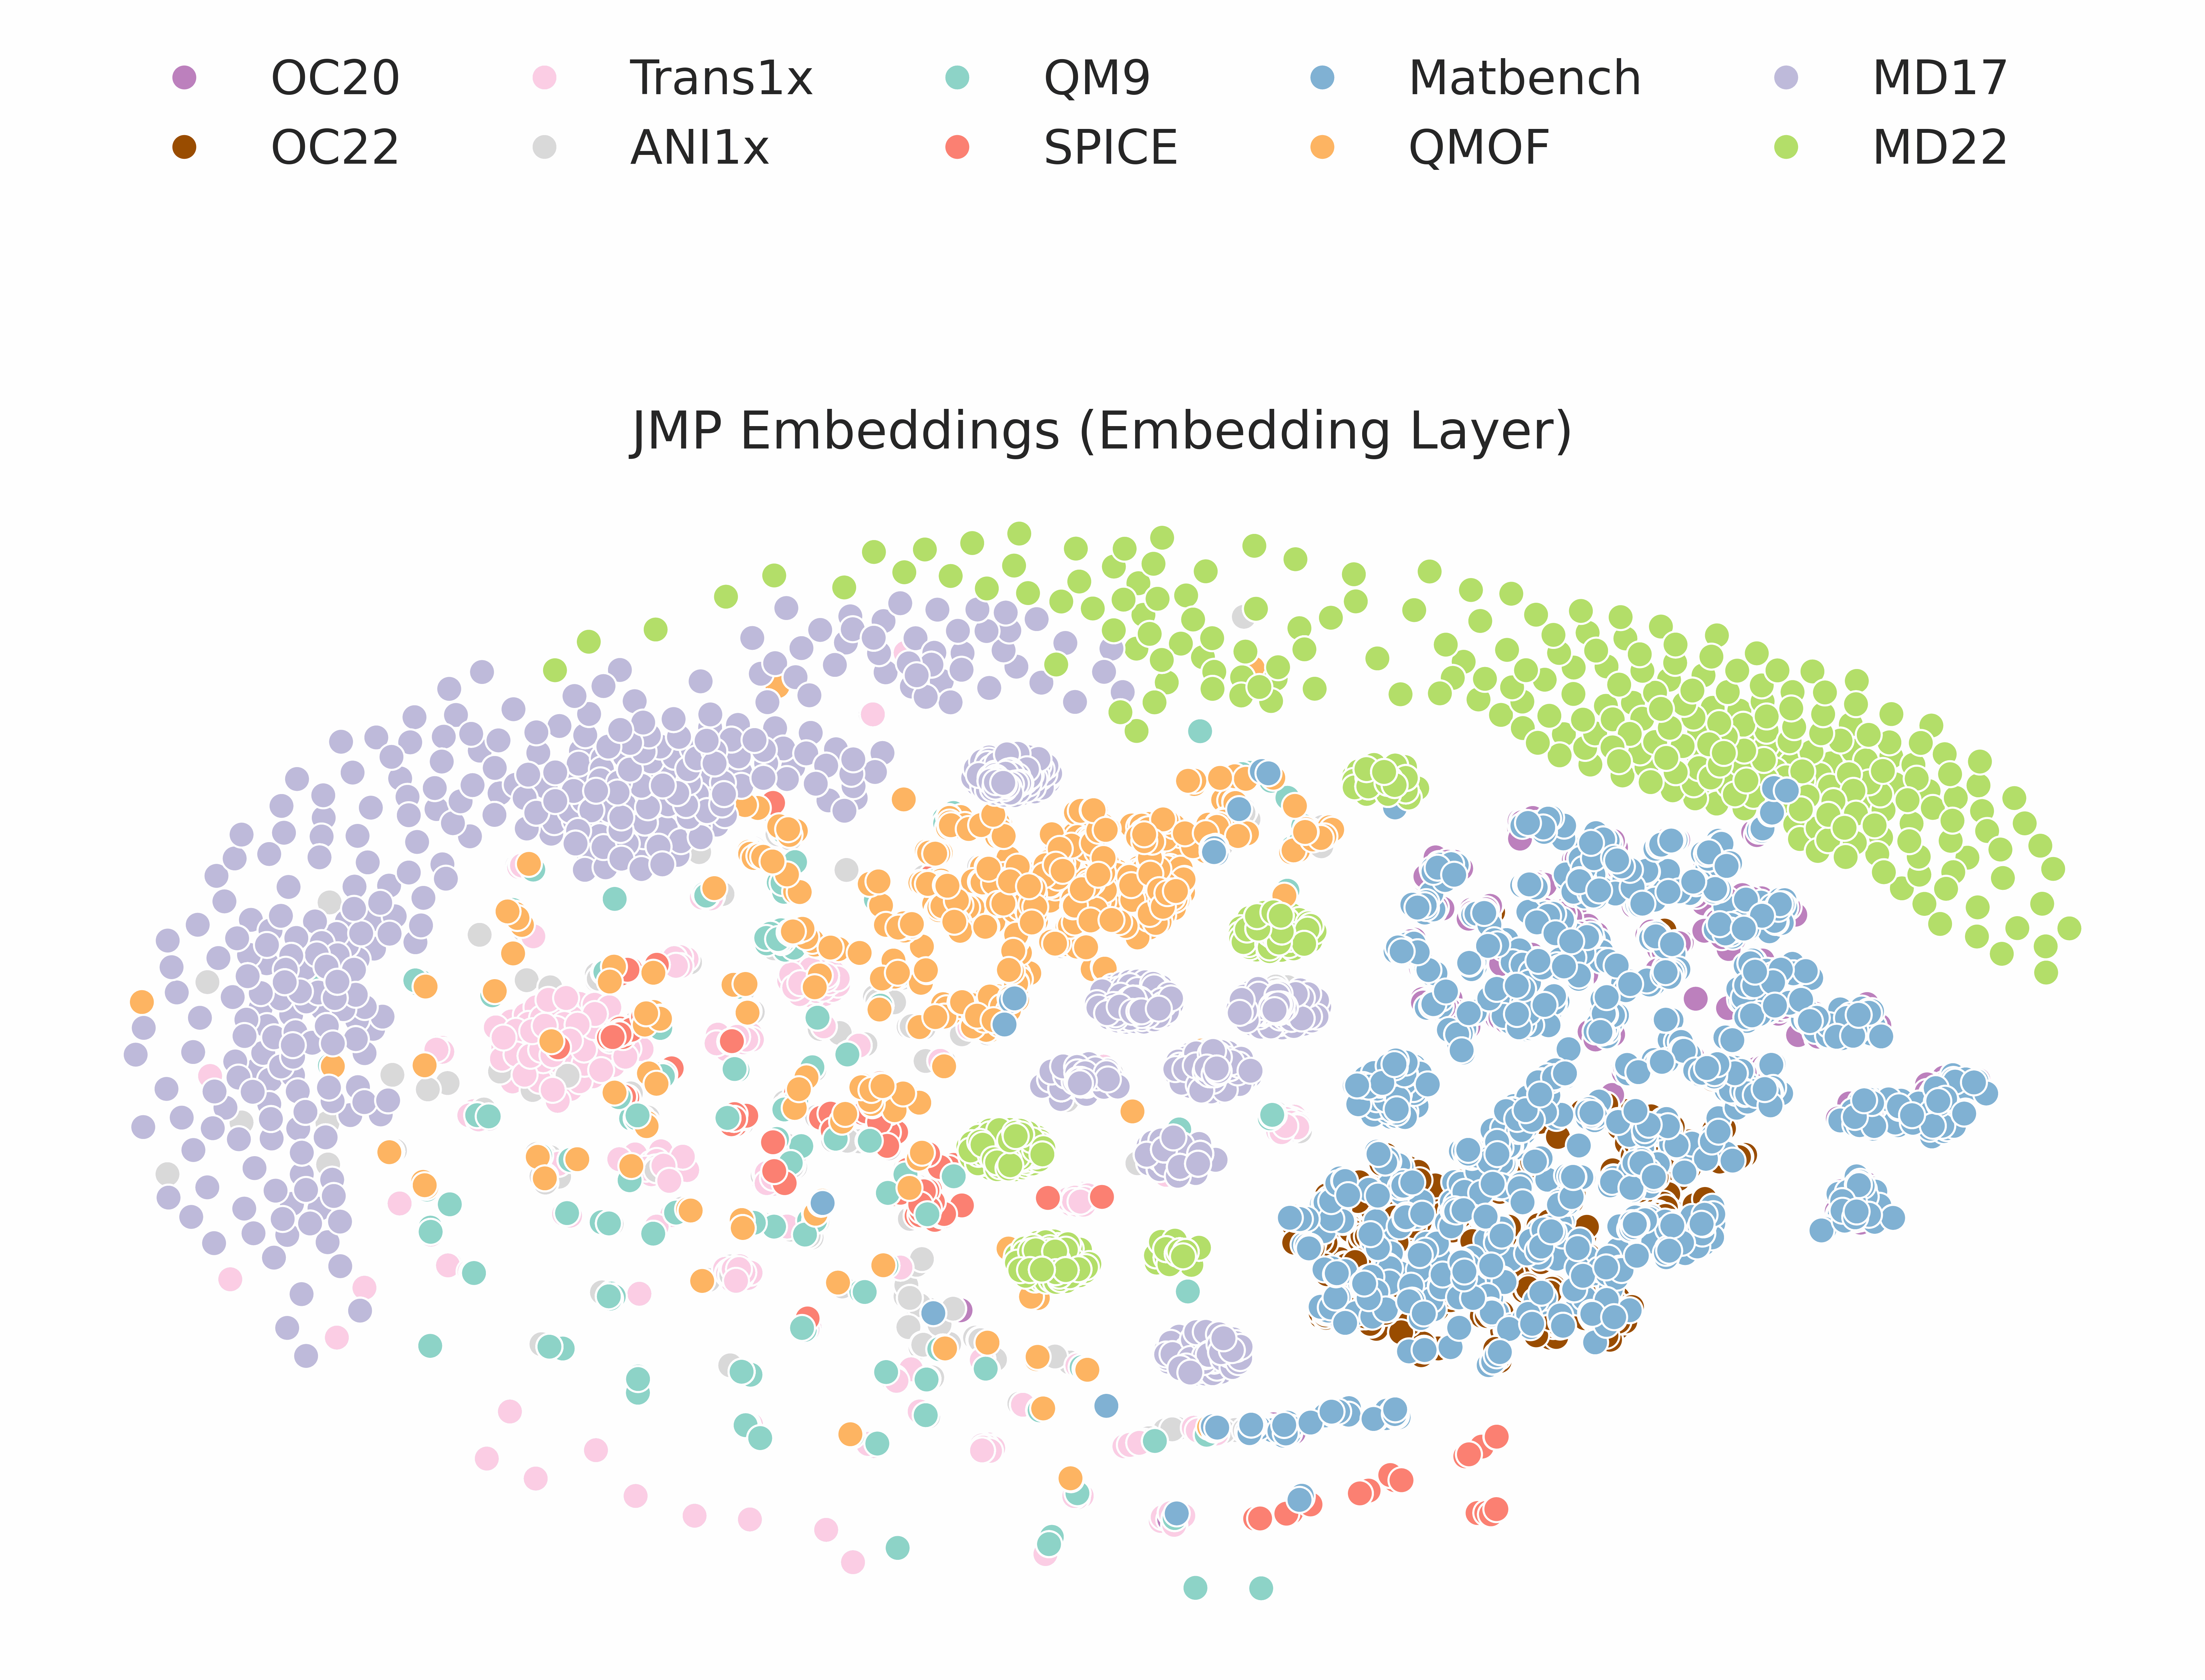 t-SNE visualizations of the learned representations in JMP. Each layer of the model is visualized, showing how the representations evolve as the model processes the input data across each GemNet layer.